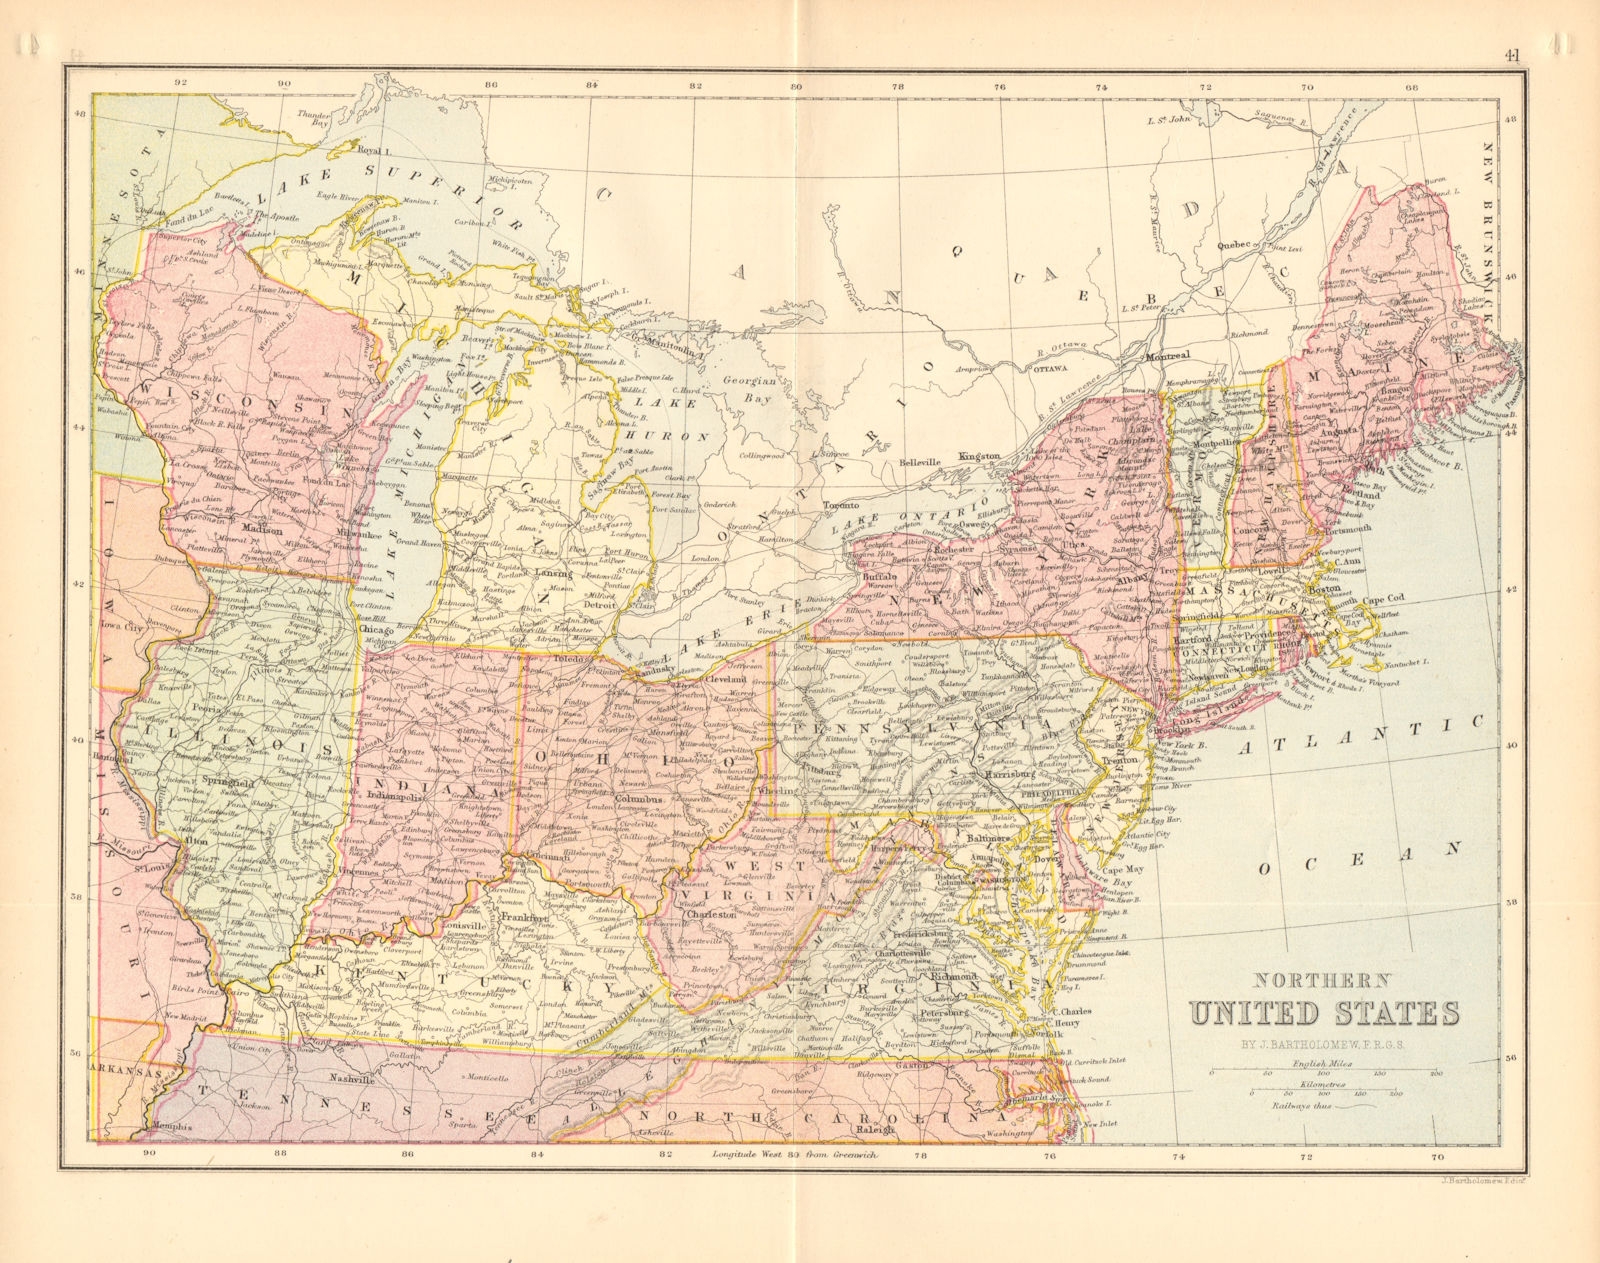 Associate Product USA NORTH EAST. Atlantic States. Midwest. BARTHOLOMEW 1876 old antique map